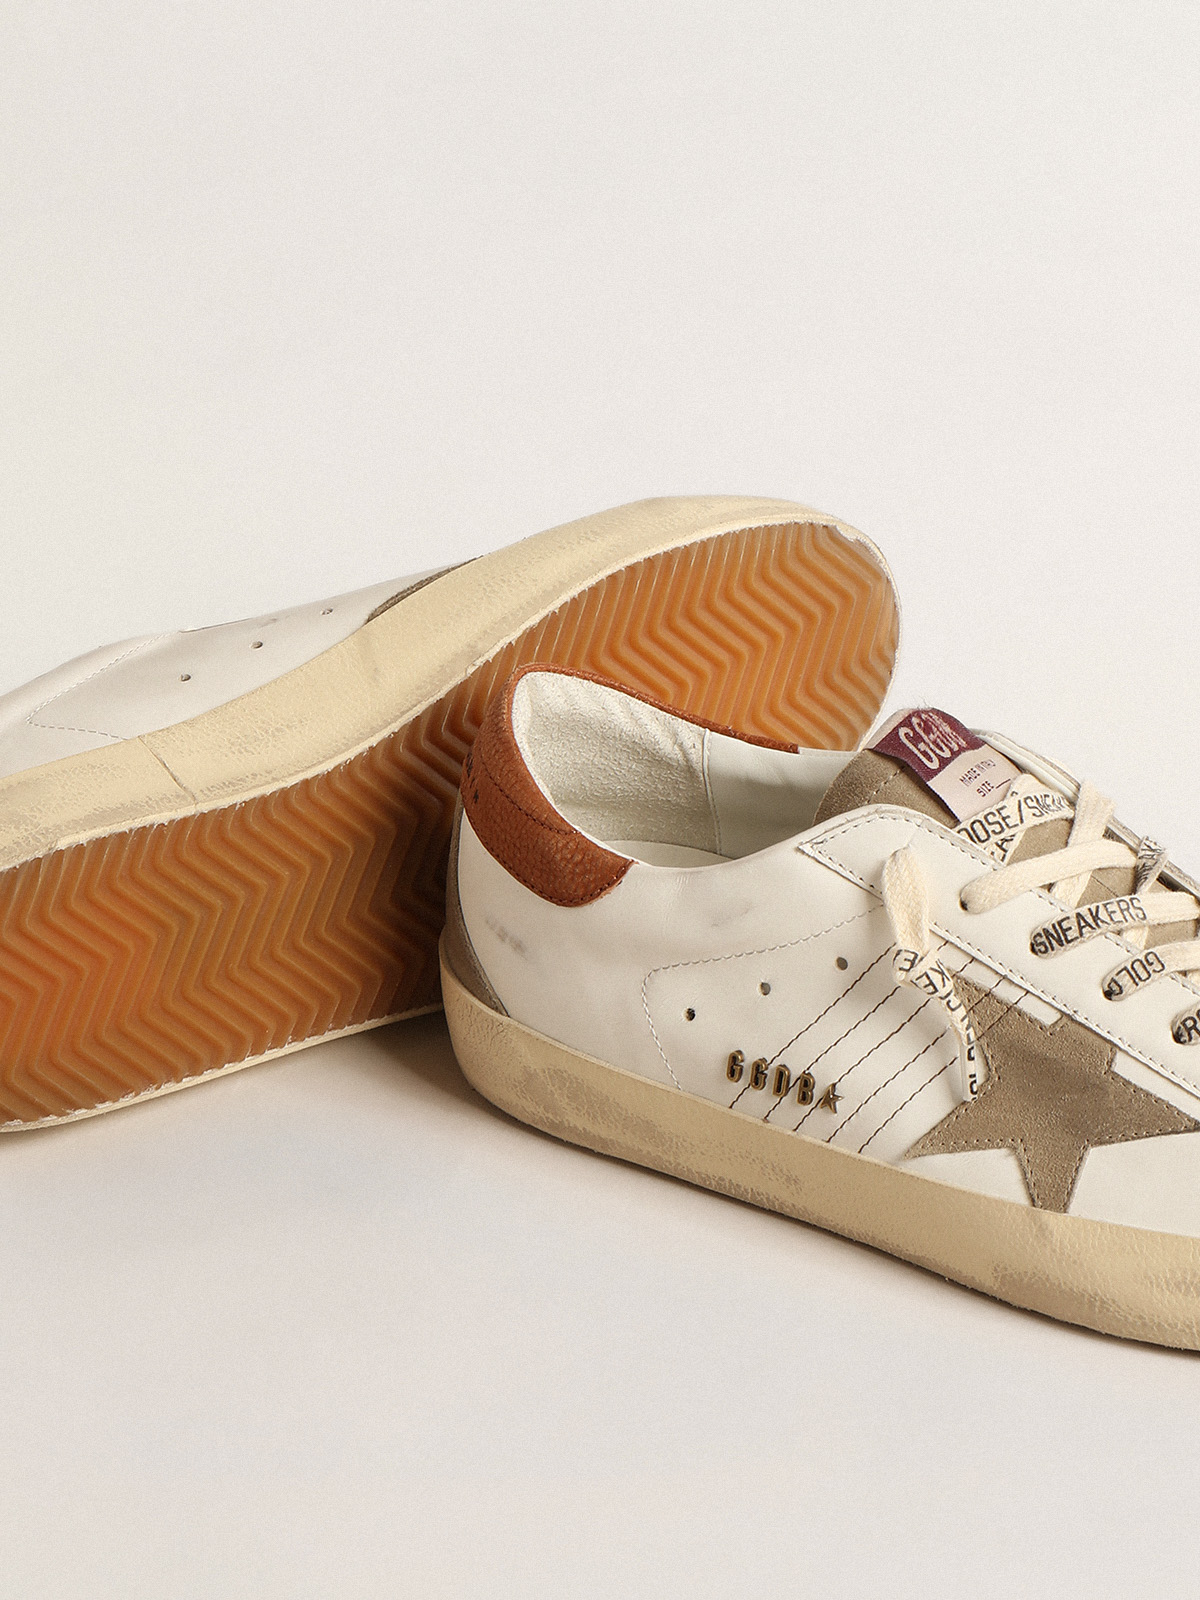 Super-Star with suede star and brown leather heel tab | Golden Goose